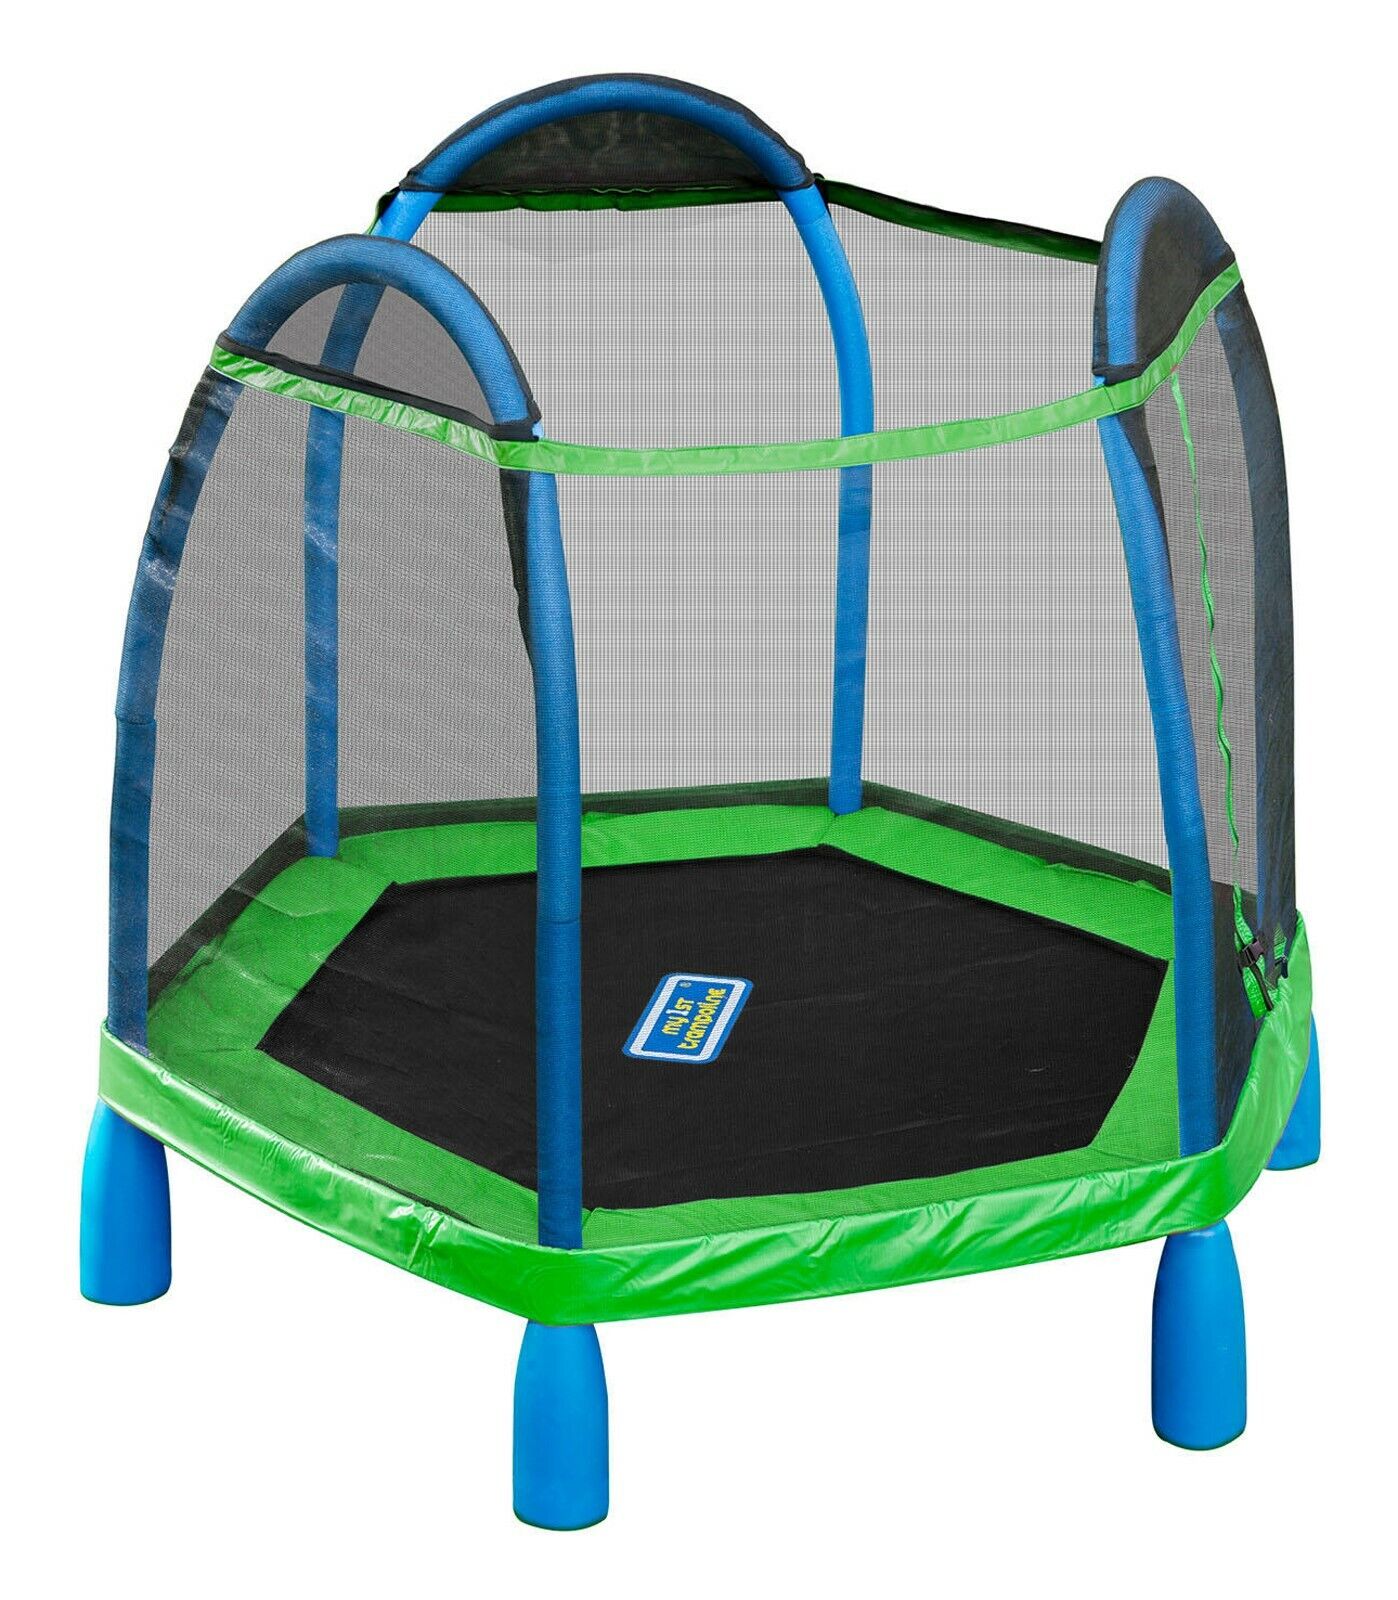 7ft My First Trampoline Kids Indoor Outdoor Bounce Pro 7' Round Age 3 - 10  687064053502 | eBay